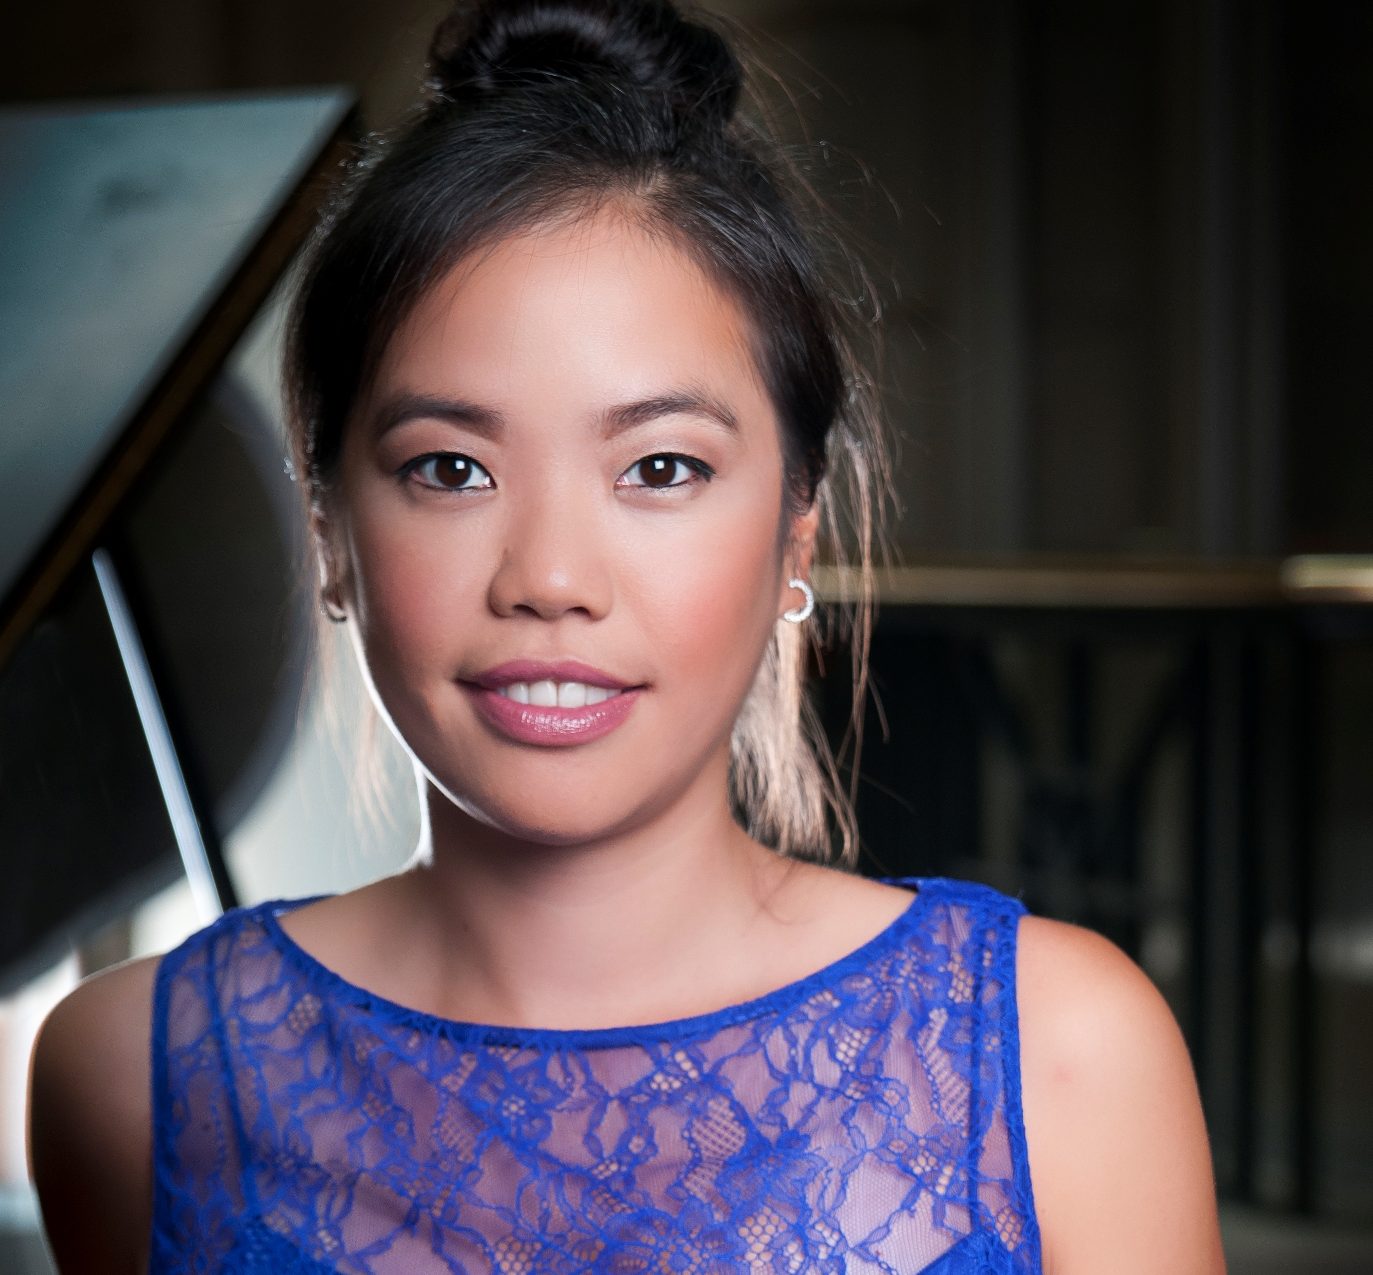 Australian soloist will be all in for night of Rachmaninov fireworks with CSO